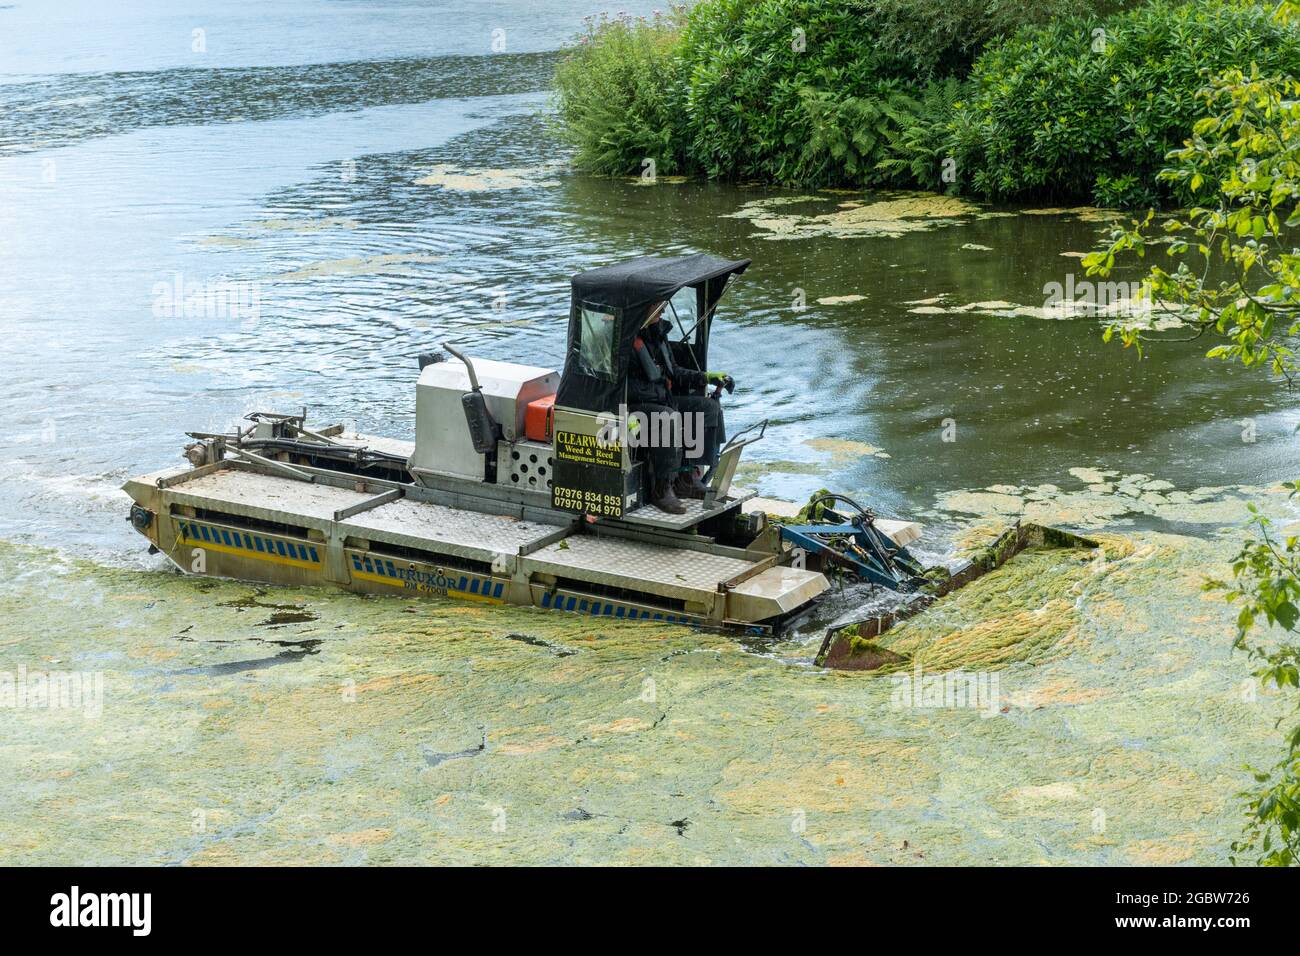 Man working on an amphibious vehicle called a truxor clearing pond weed or algae from a lake, UK Stock Photo